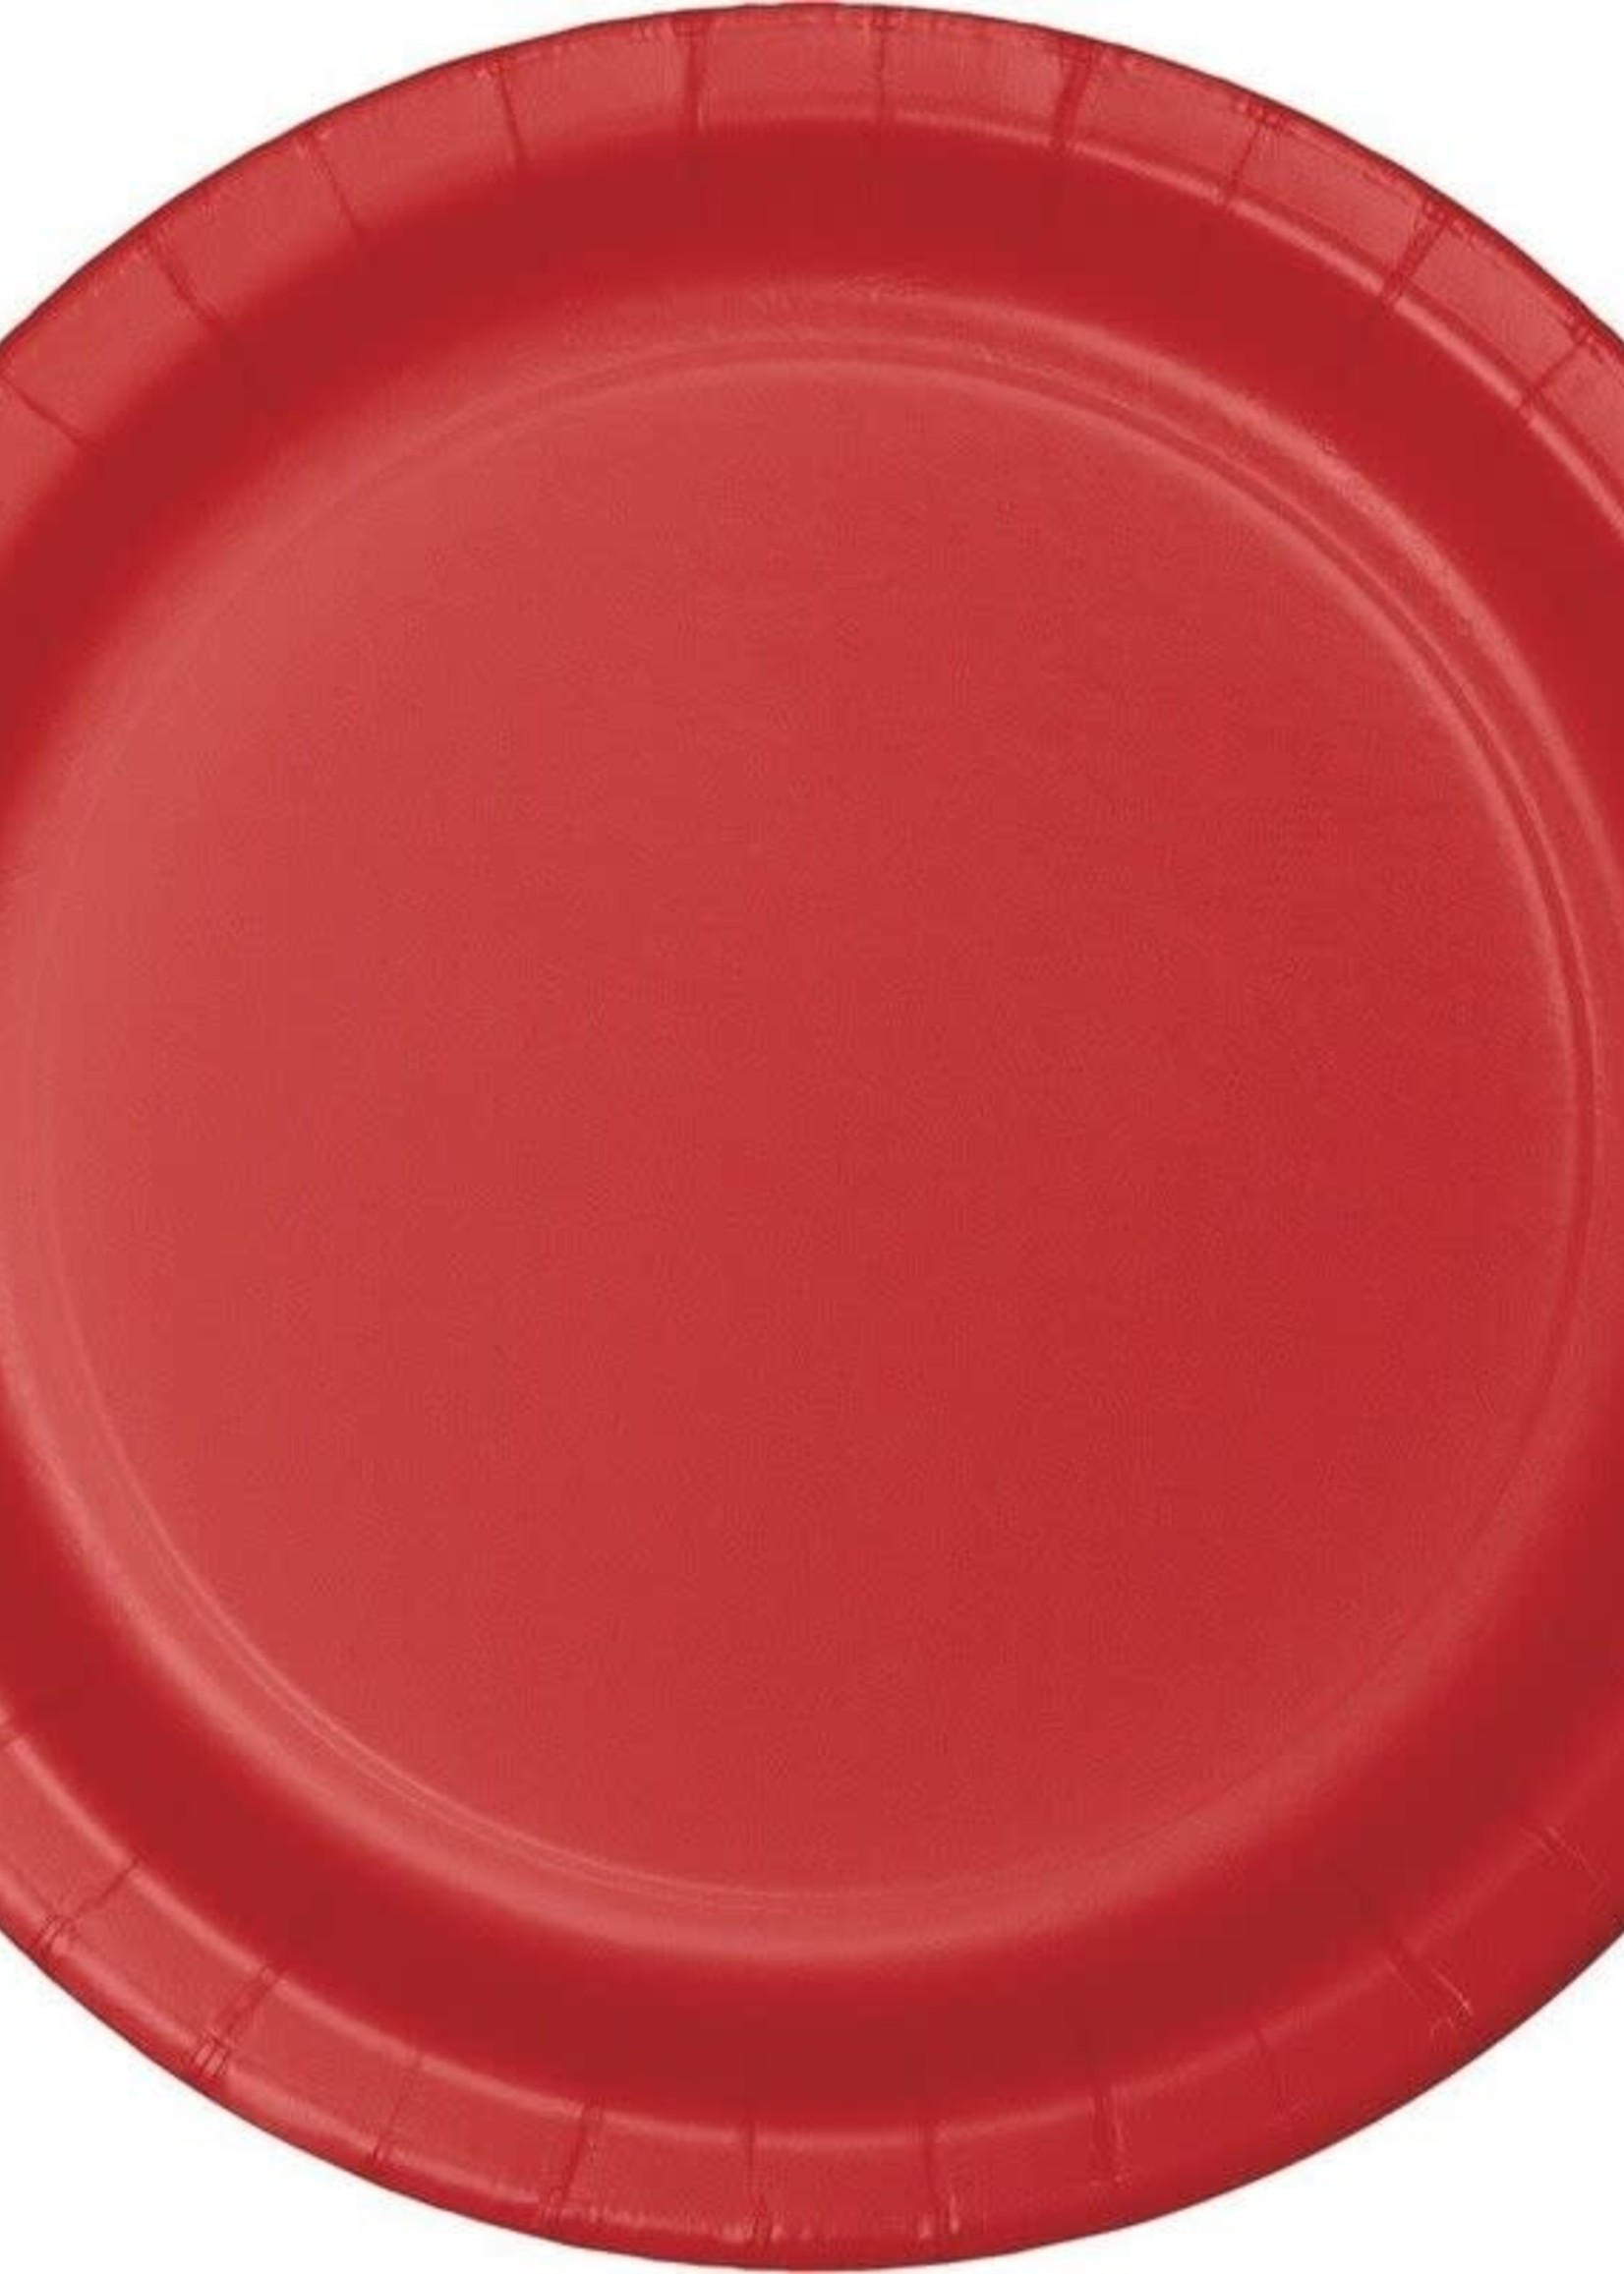 Classic Red Luncheon Plate 75ct